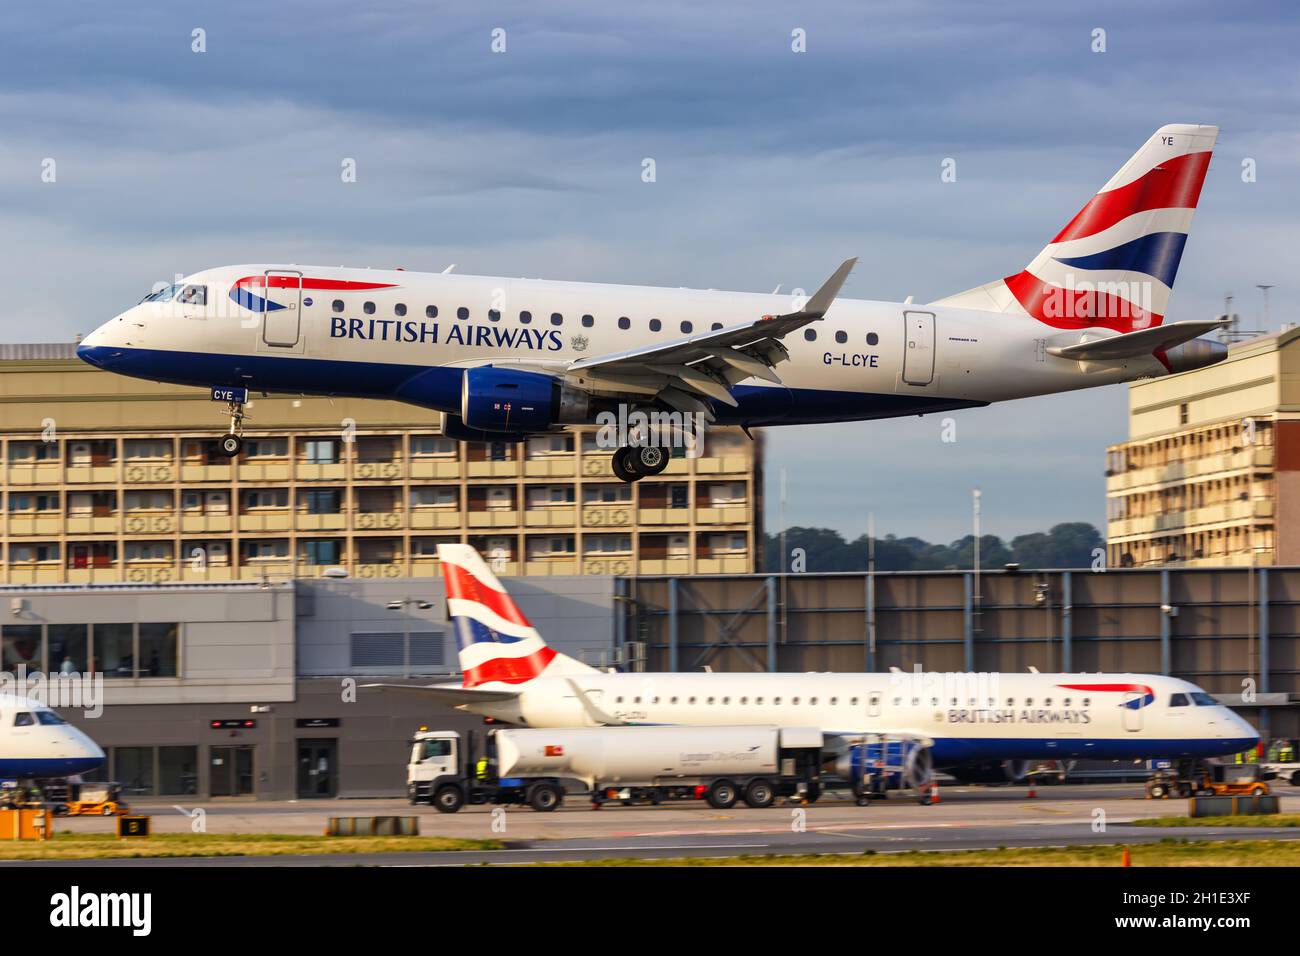 London, United Kingdom – July 8, 2019: British Airways BA CityFlyer Embraer 170 airplane at London City airport (LCY) in the United Kingdom. Stock Photo